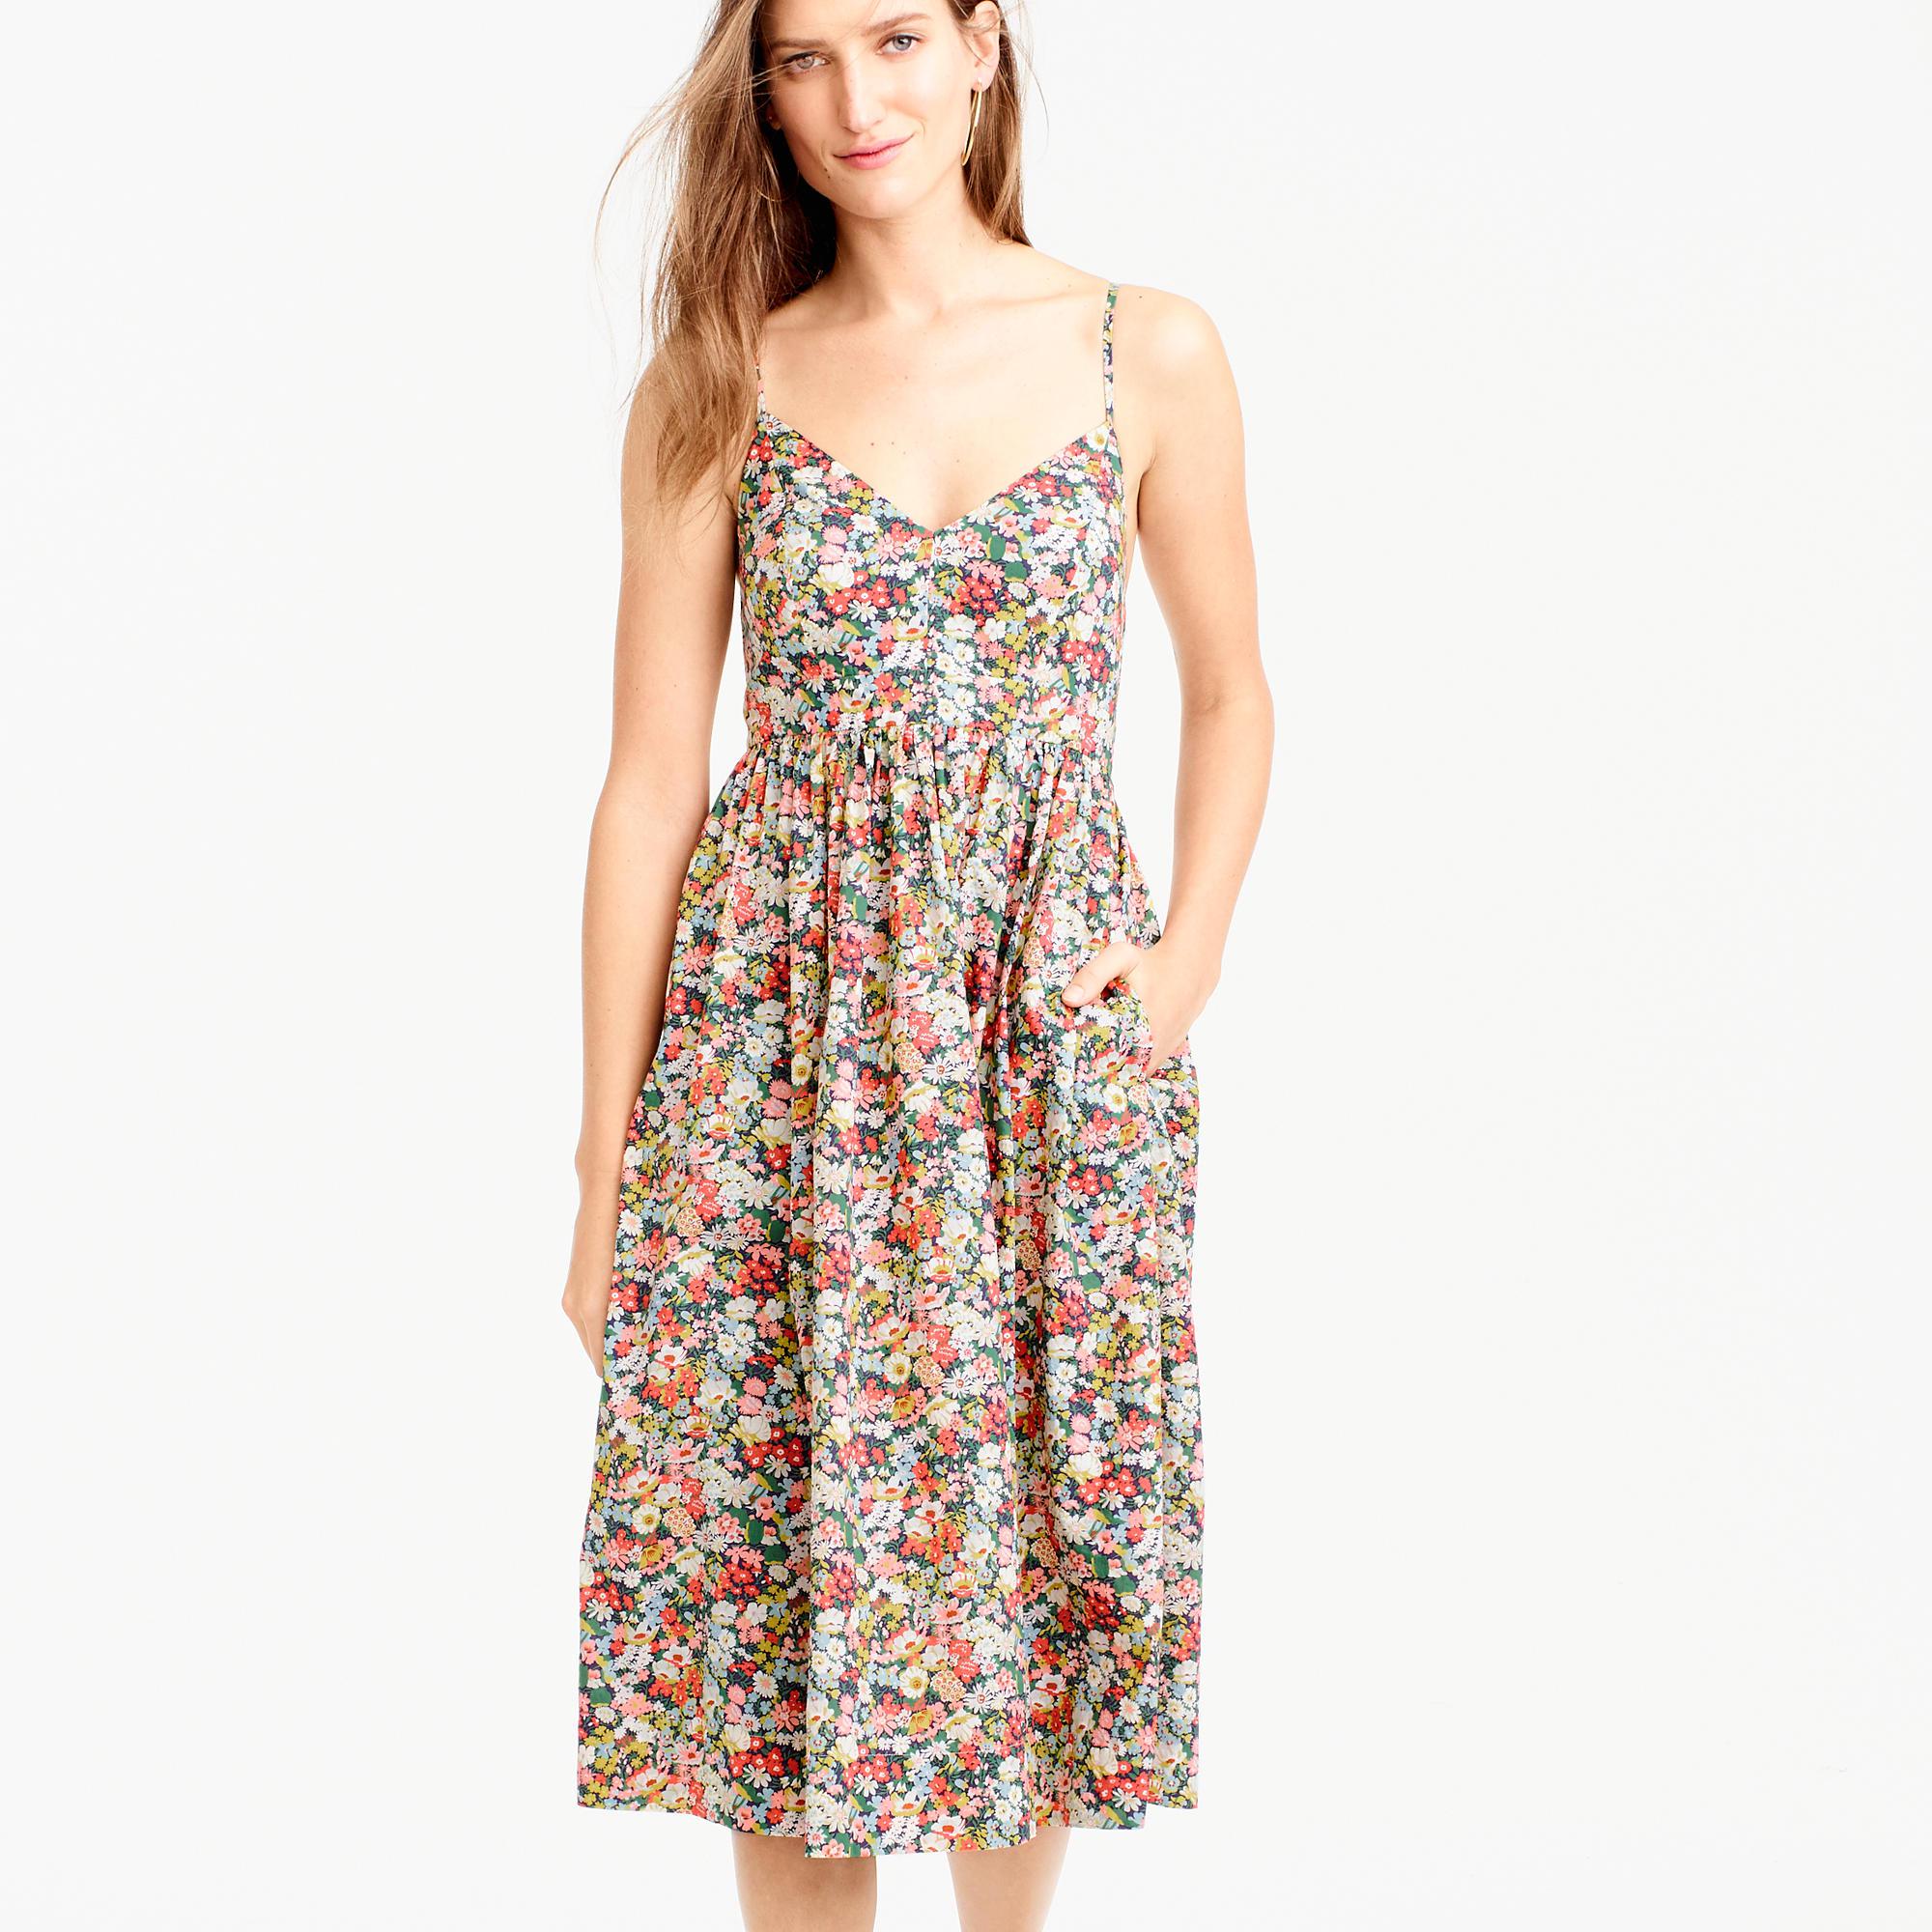 Details about   j crew dress 16 Liberty Of London 